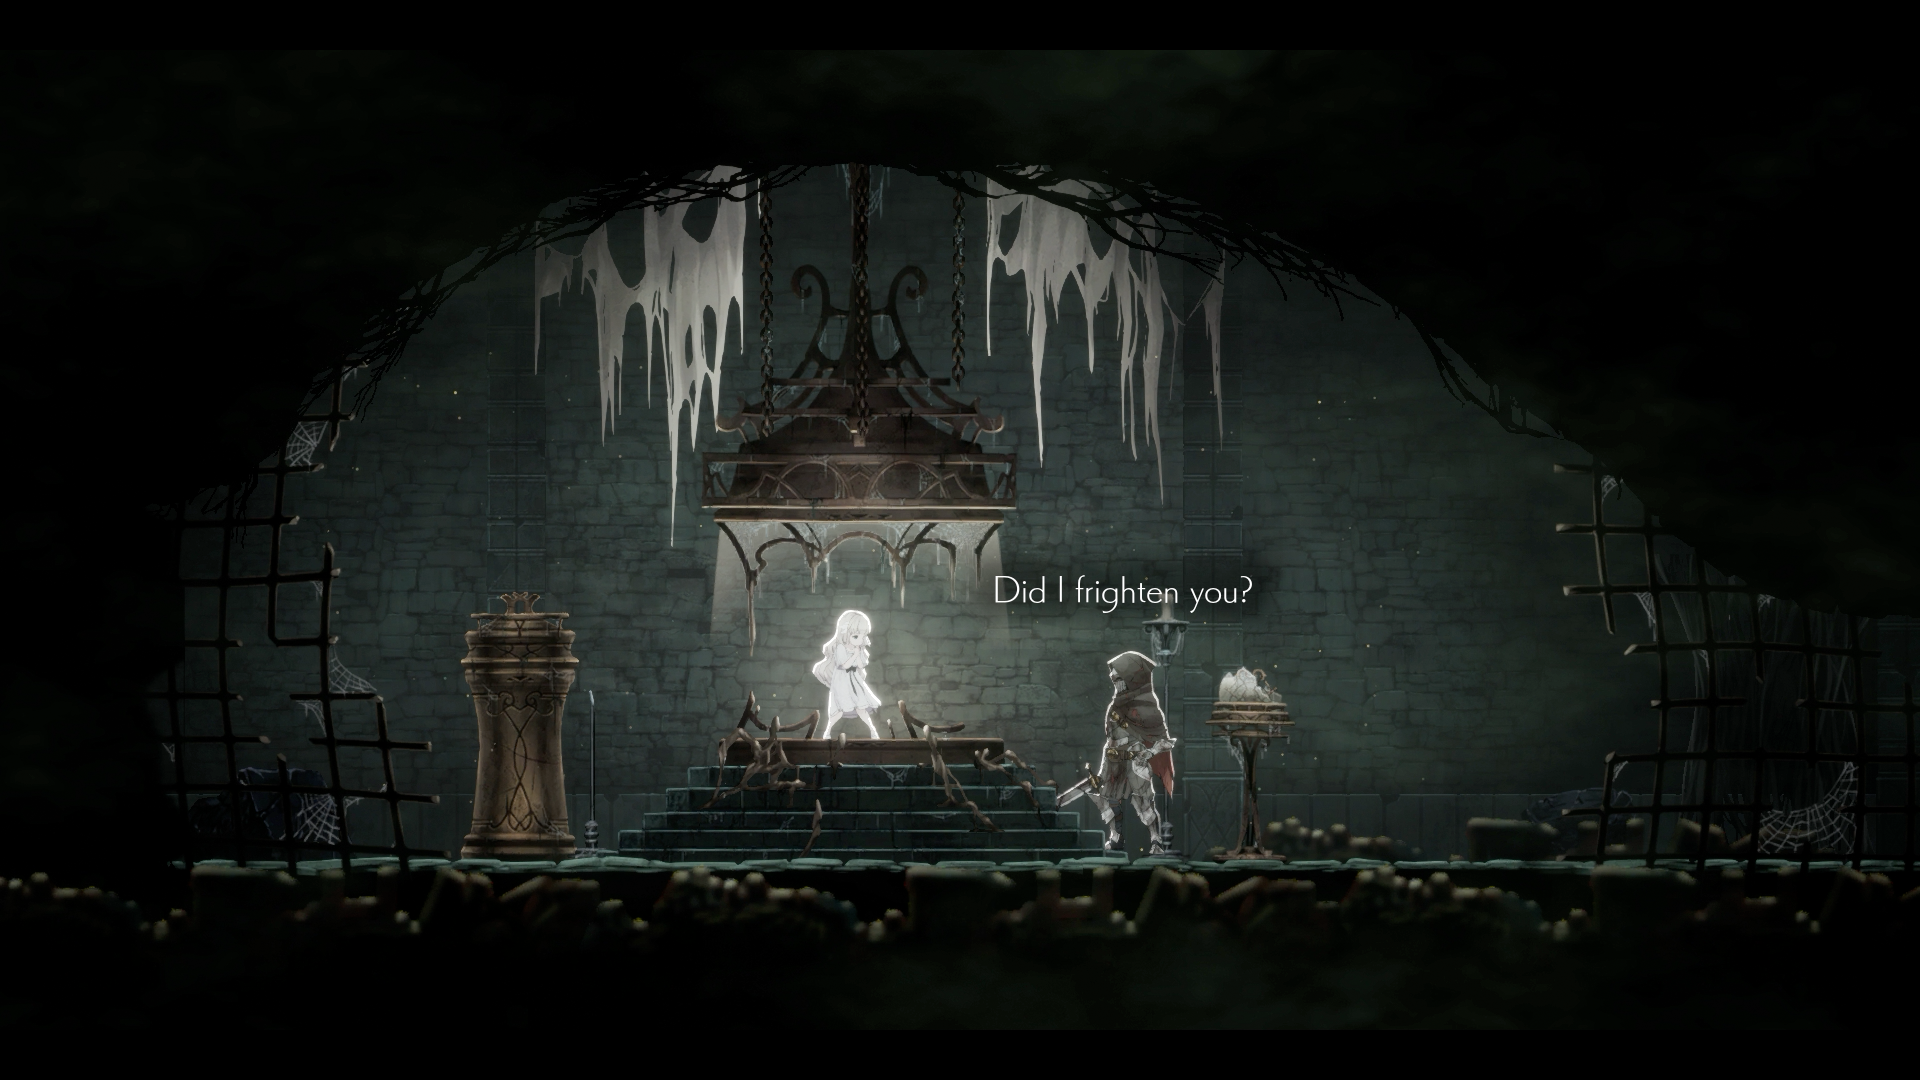 Ender Lilies: Quietus of the Knights Enters Steam Early Access Today